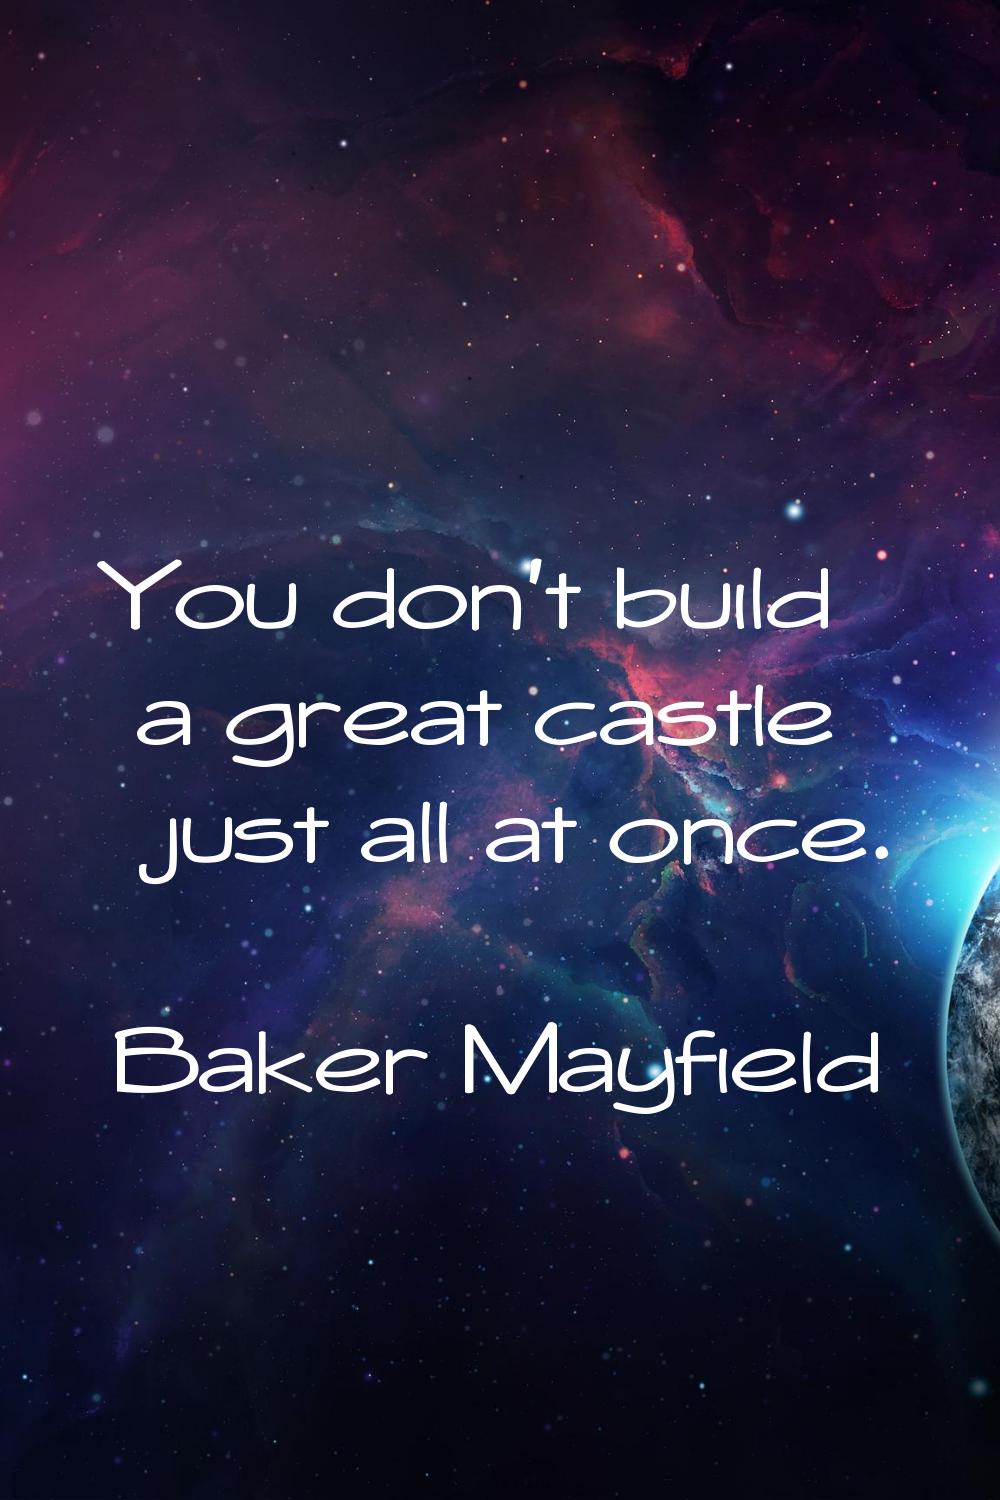 You don't build a great castle just all at once.